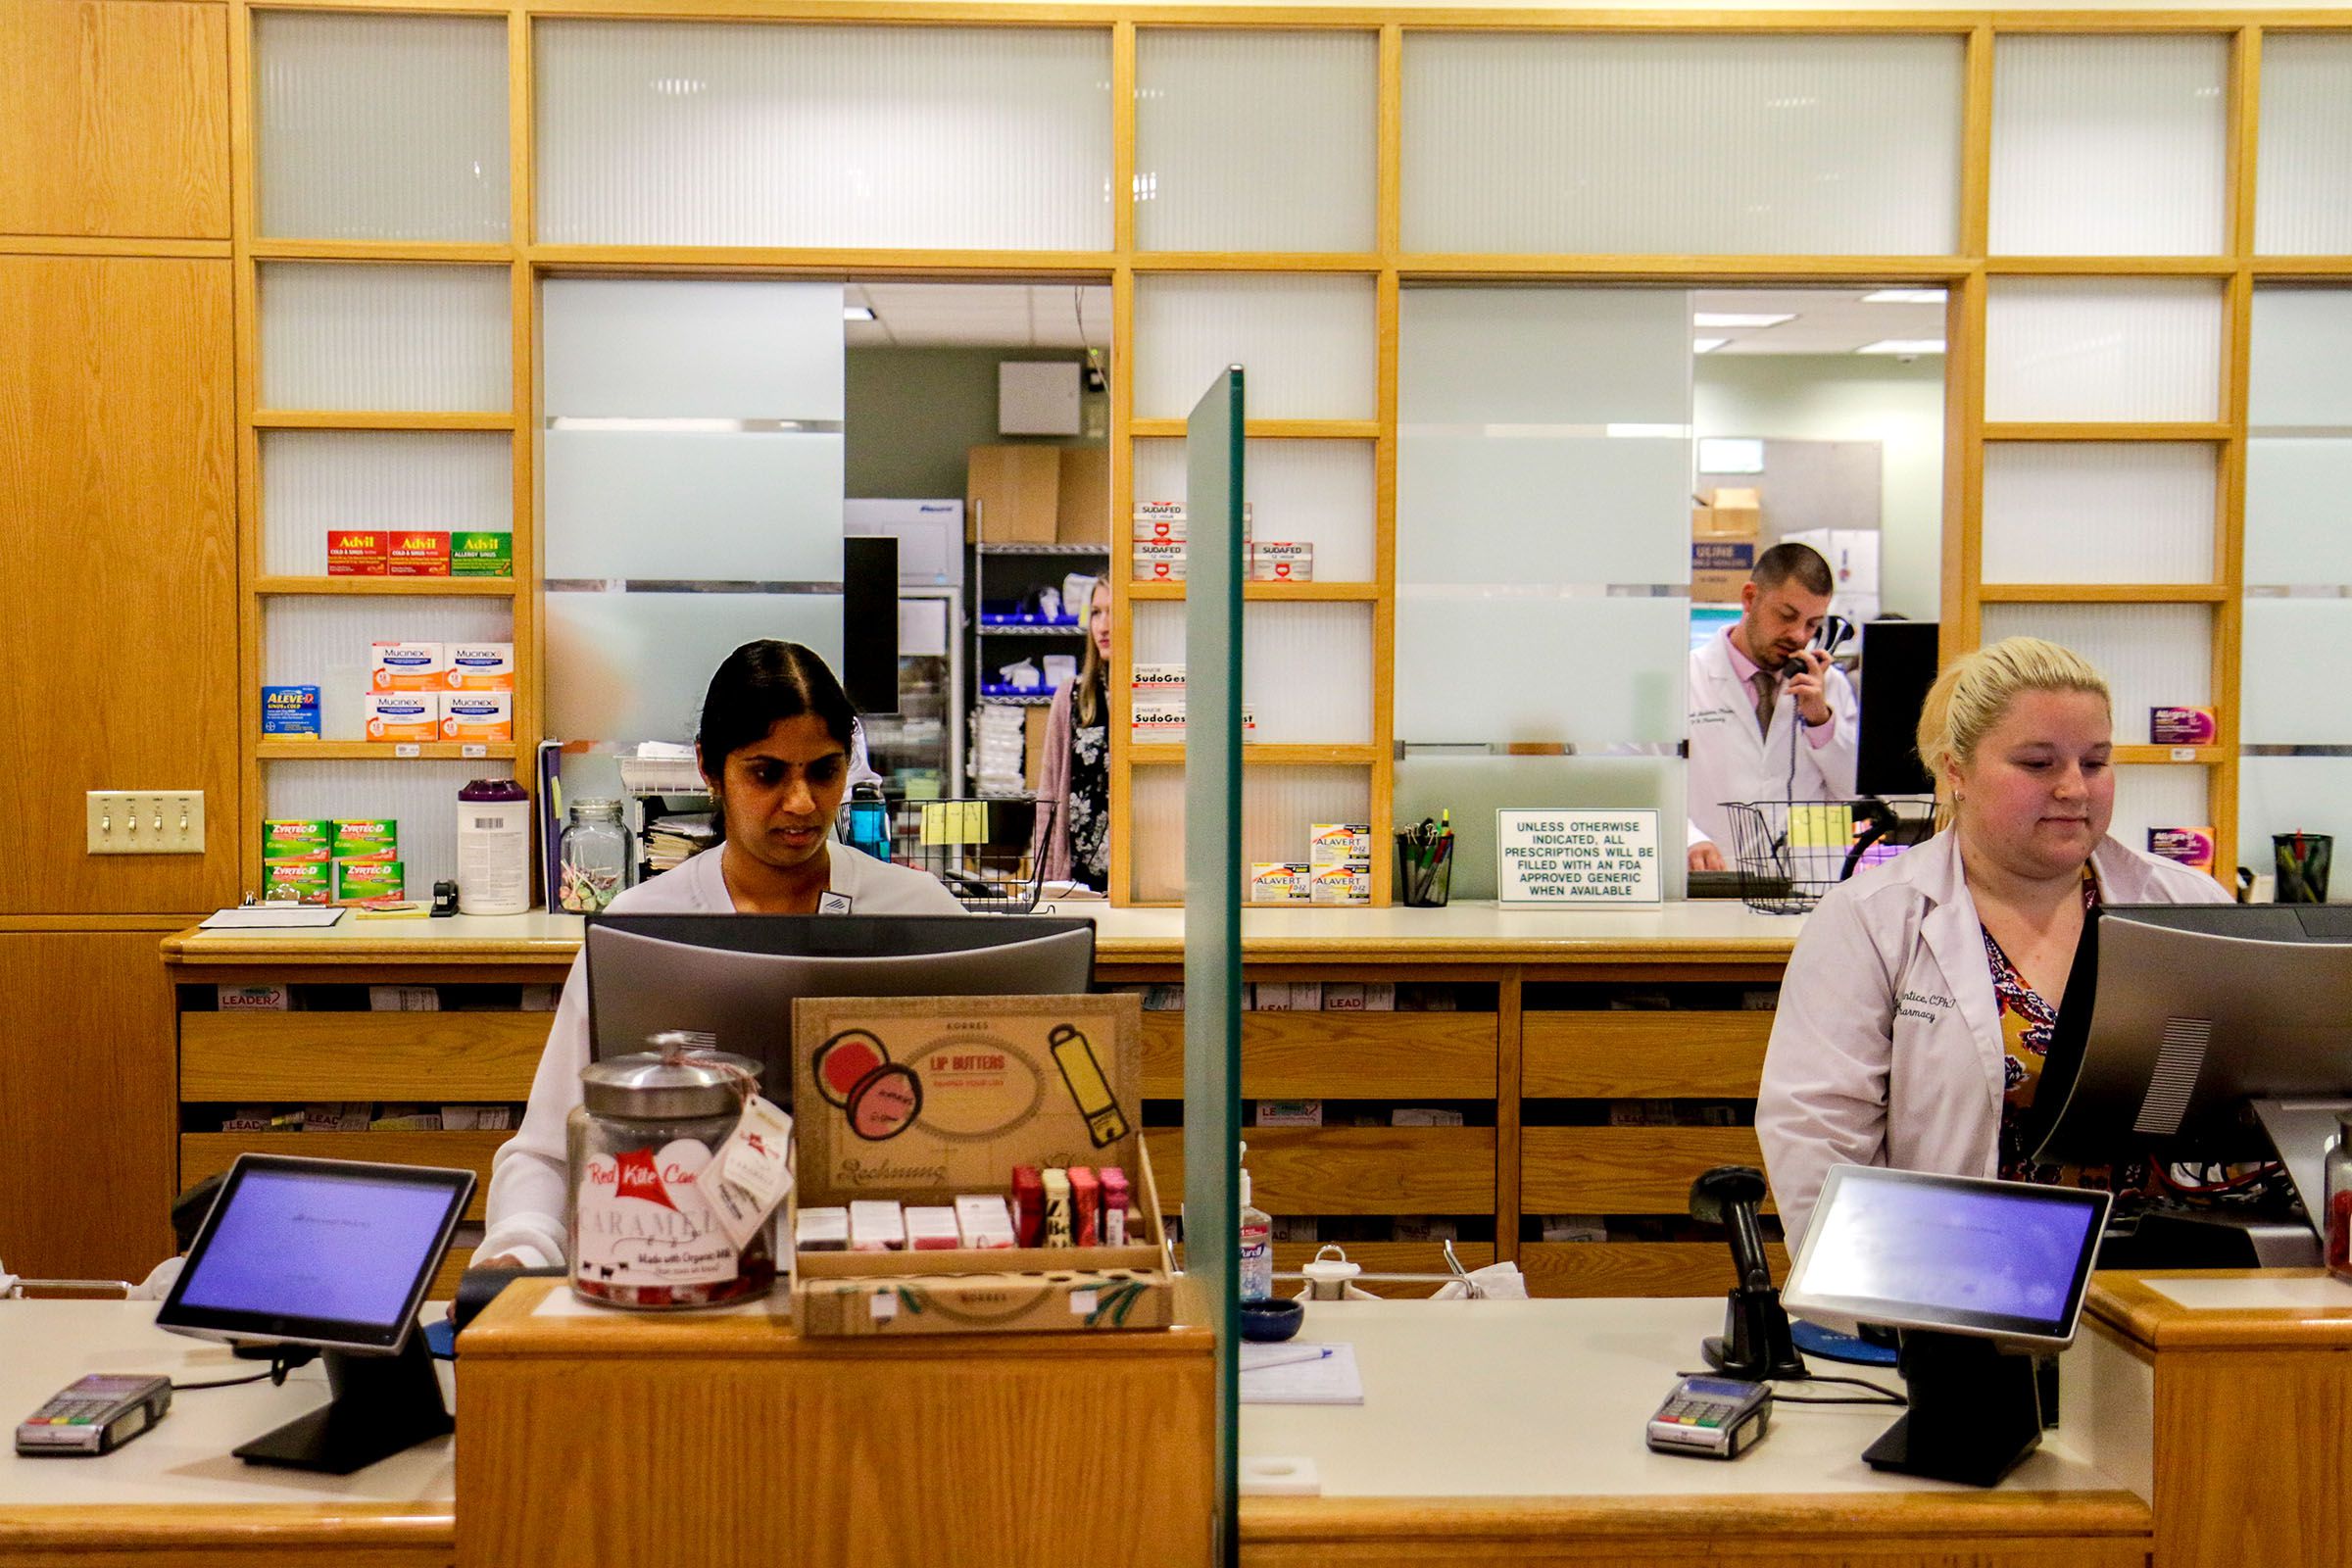 Pharmacy Technicians Vijaya Modugula, left, of Hanover, N.H., Jessica Prentice, of Lebanon, N.H., and pharmacist Michael Nardone, back, of Manchester, N.H., work in the outpatient pharmacy of Dartmouth-Hitchcock Medical Center in Lebanon, N.H., on Tuesday, Oct. 9, 2018. Modugula recently began her apprenticeship in the DHMC's Workforce Readiness Institute program after completing a nine-week training. She plans to continue as a pharmacy technician after completing the apprenticeship. (Valley News - August Frank) Copyright Valley News. May not be reprinted or used online without permission. Send requests to permission@vnews.com.